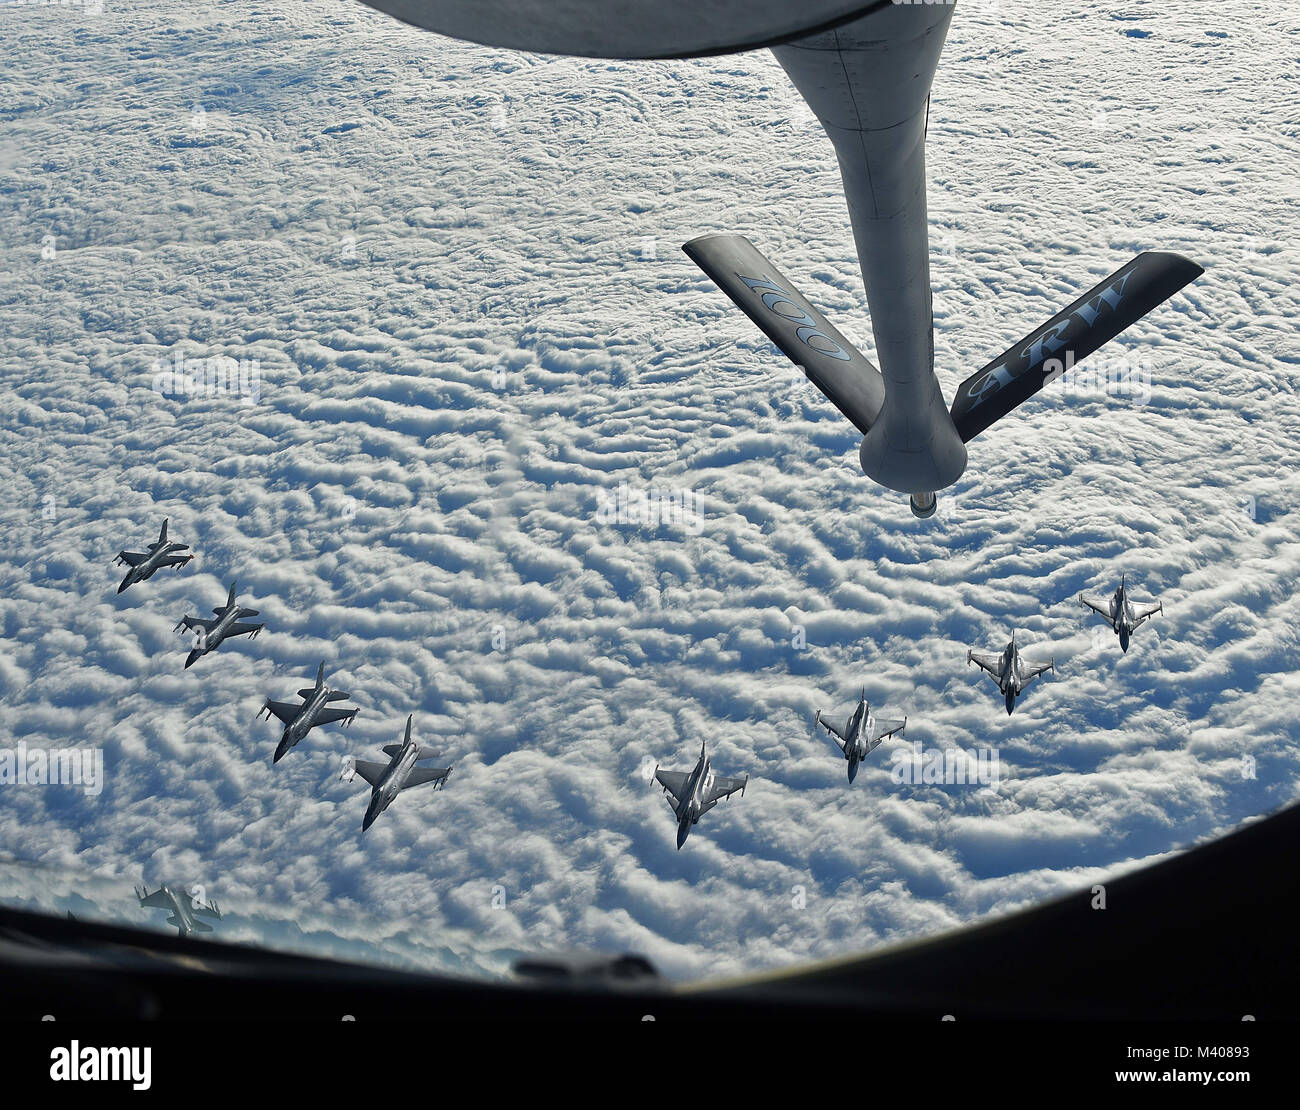 Four U.S. Air Force F-16C Fighting Falcons and four Swedish Air Force JAS 39 Gripens fly in formation together behind a U.S. Air Force KC-135 Stratotanker during aerial refueling training in Swedish airspace, Feb. 8, 2018. The air refueling training is in conjunction with a rotational deployment of F-16Cs from the Ohio Air National Guard’s 180th Fighter Wing to Amari Air Base, Estonia, as part of a Theater Security Package. The training allows the U.S. and Sweden to strengthen interoperability and increase readiness.  (U.S. Air Force photo by Airman 1st Class Luke Milano) Stock Photo